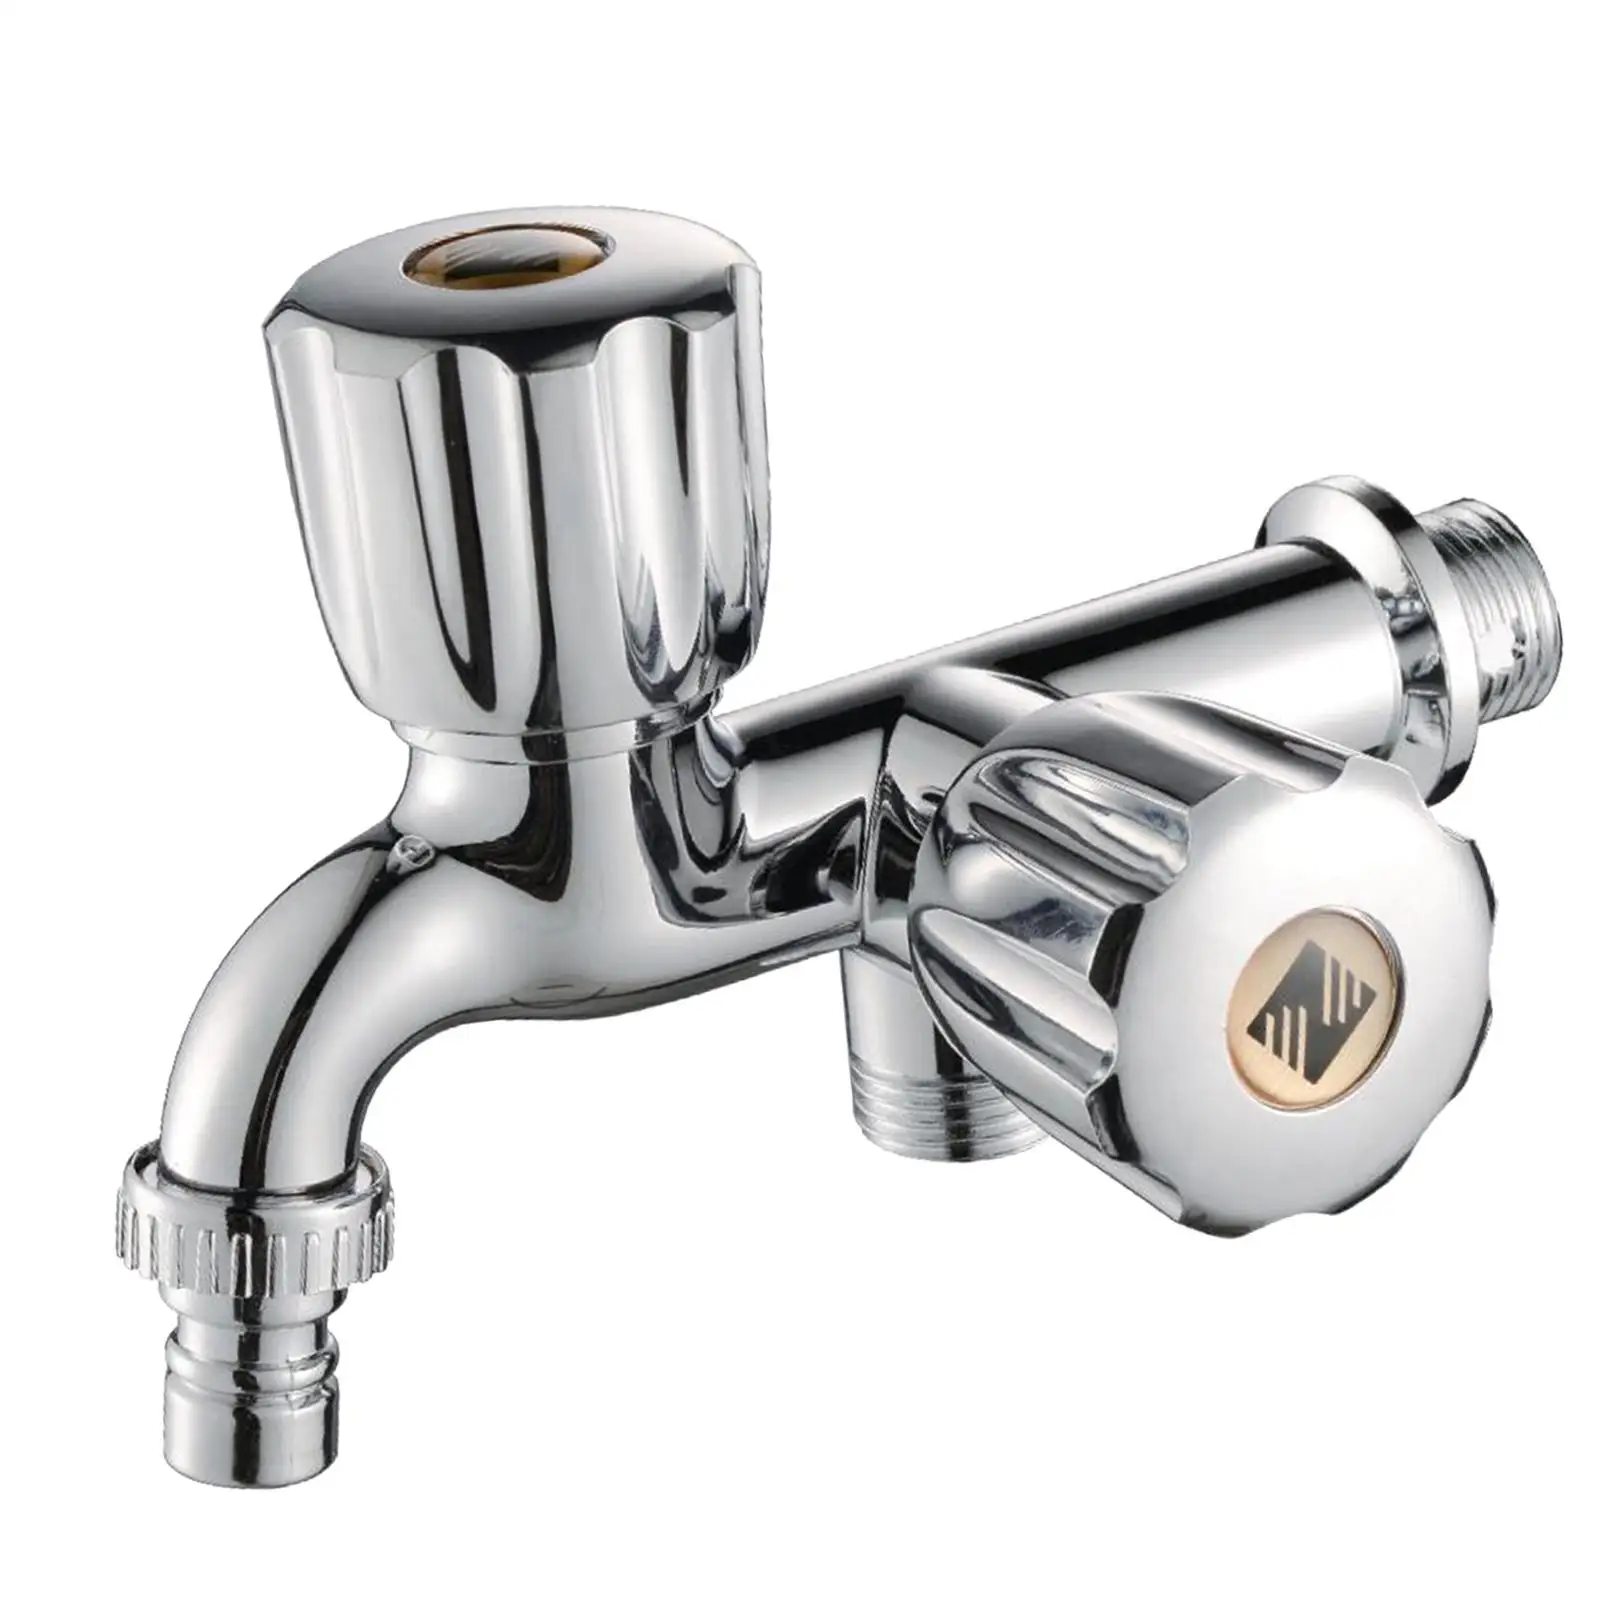 Water Faucet for Washing Machine G1/2 Water Tap Faucet for Laundry Room Pool